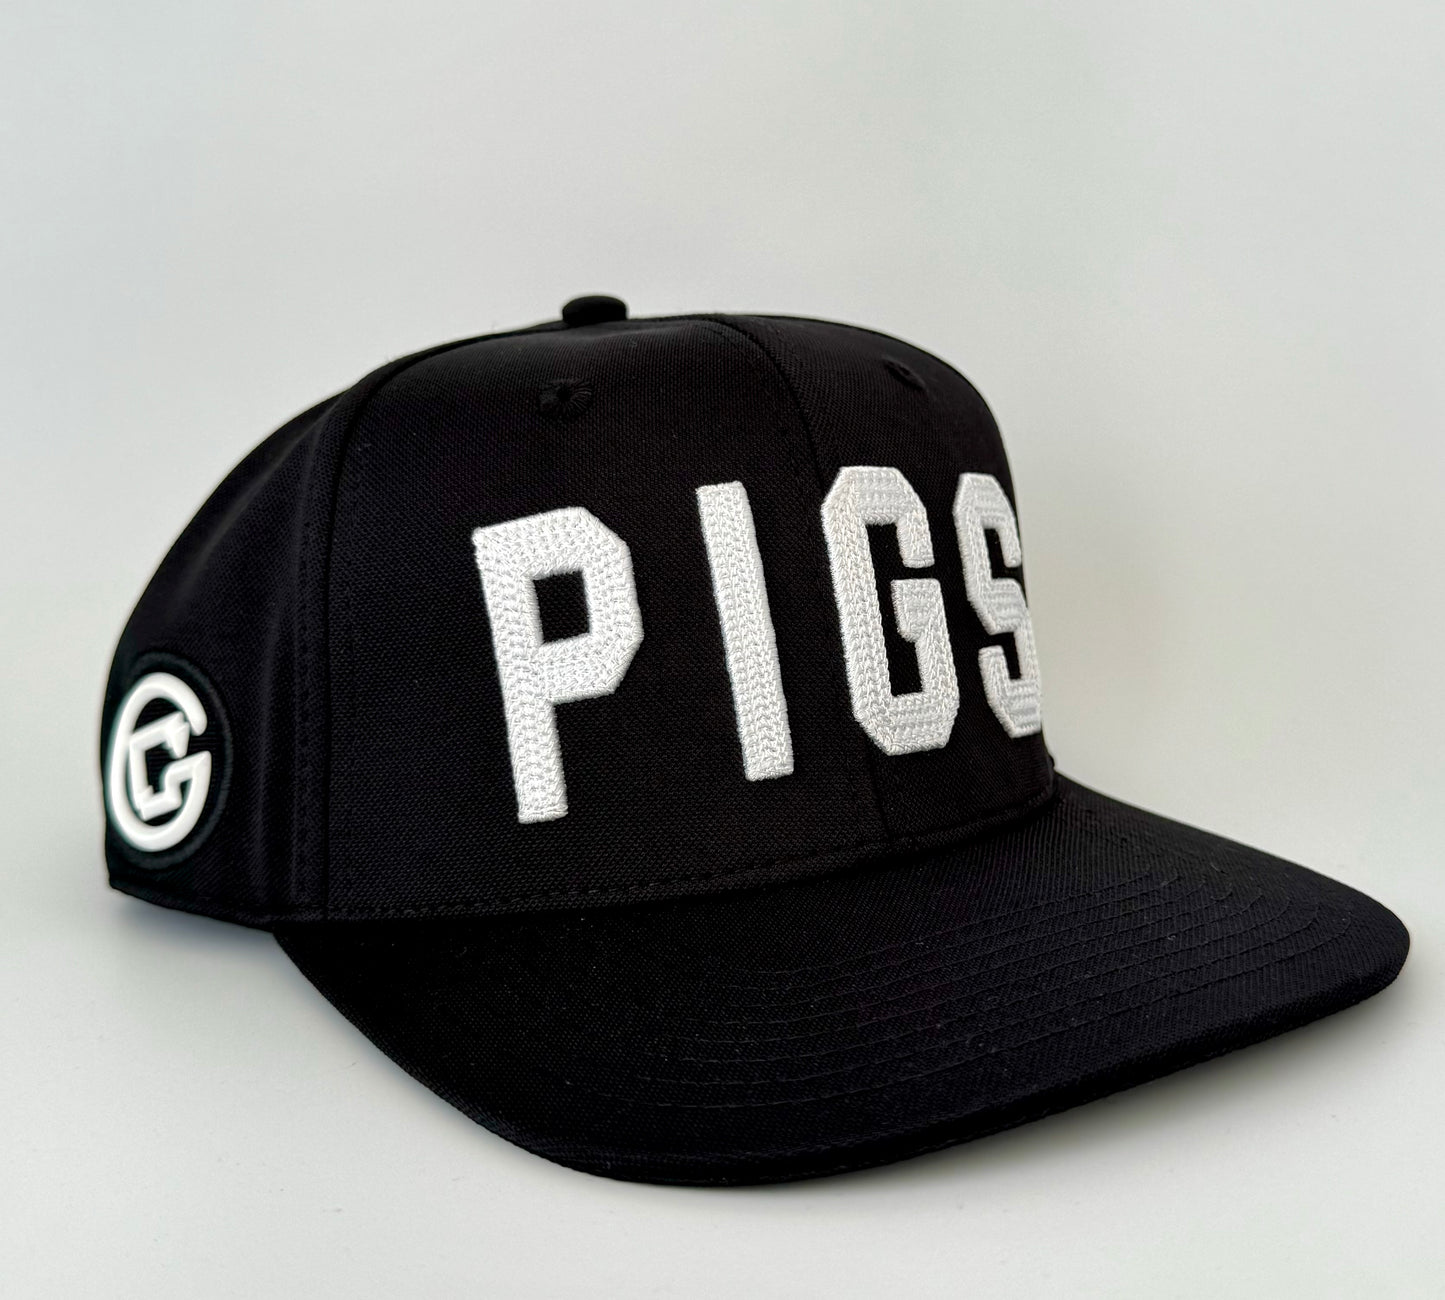 PIGS - Black with White (no rope) - Snapback - Flat Bill